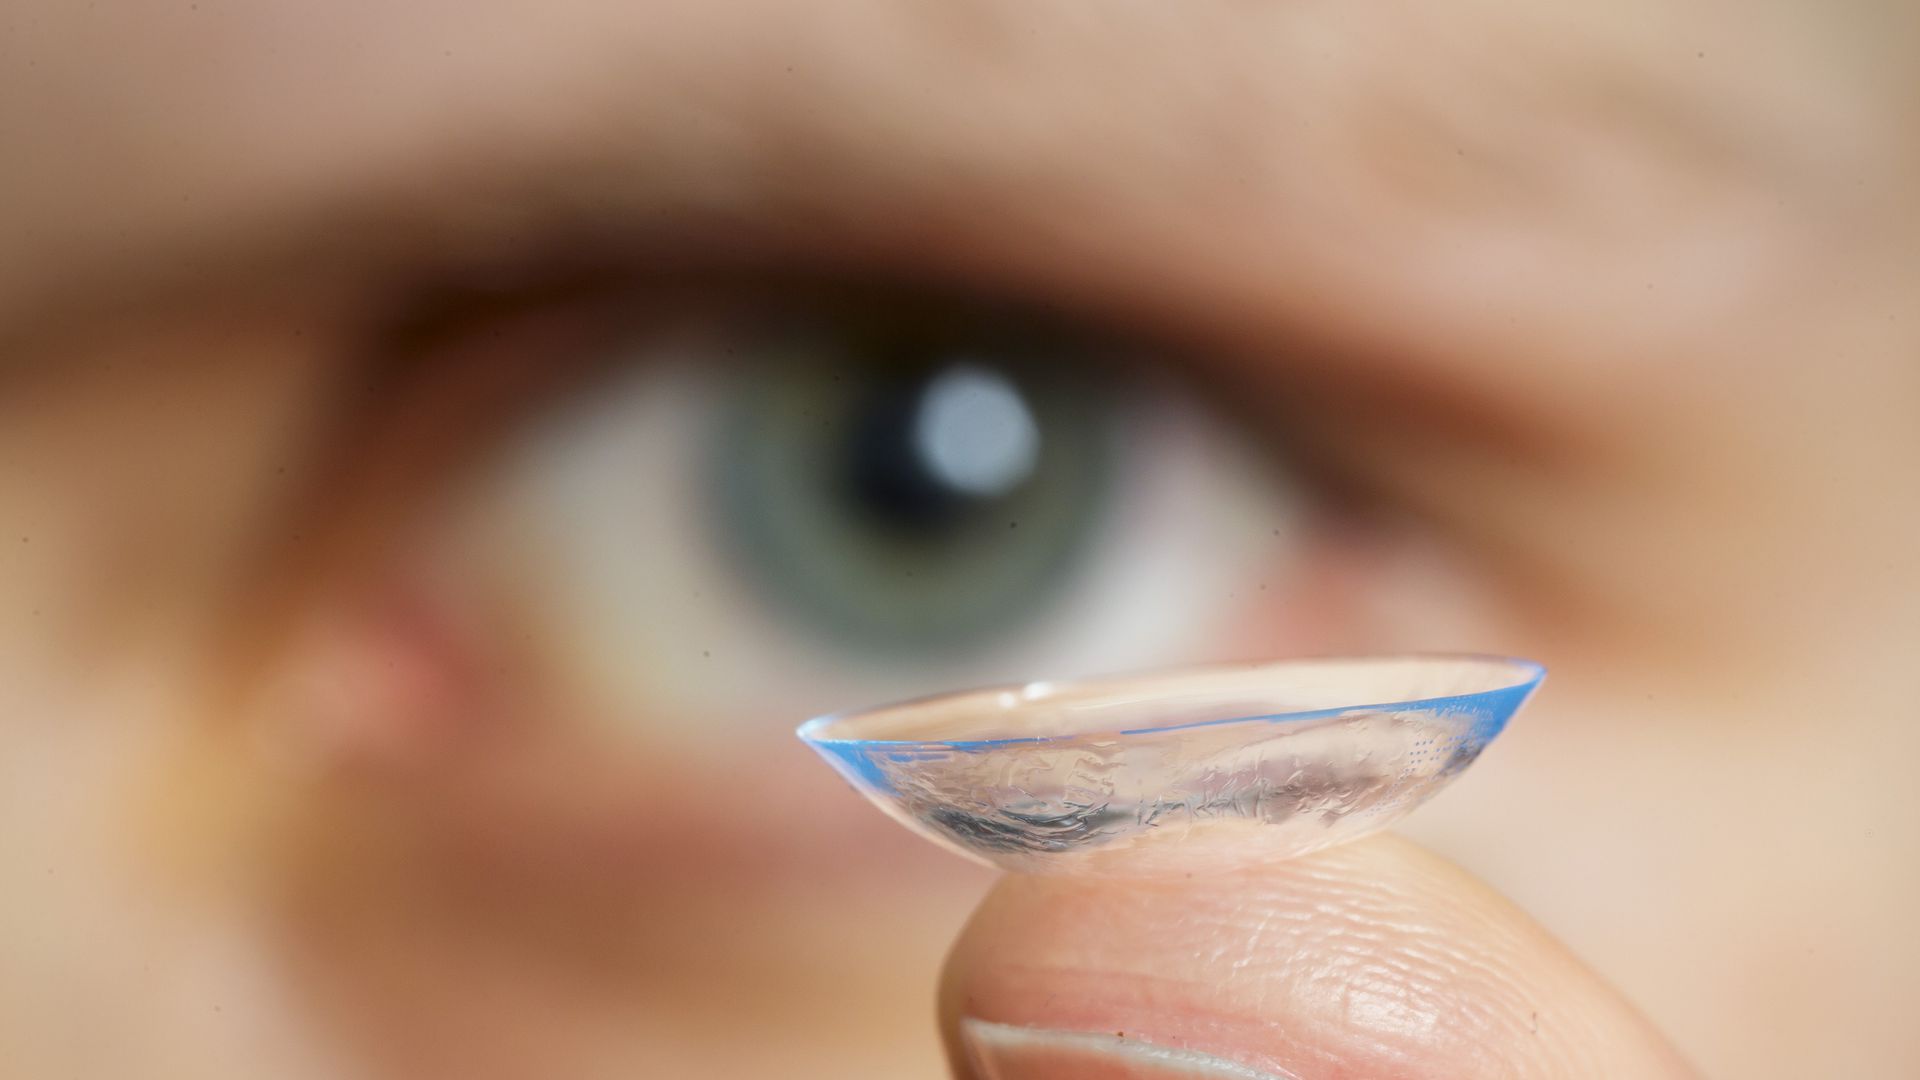 Important Things To Know Before Buying Contact Lenses ...